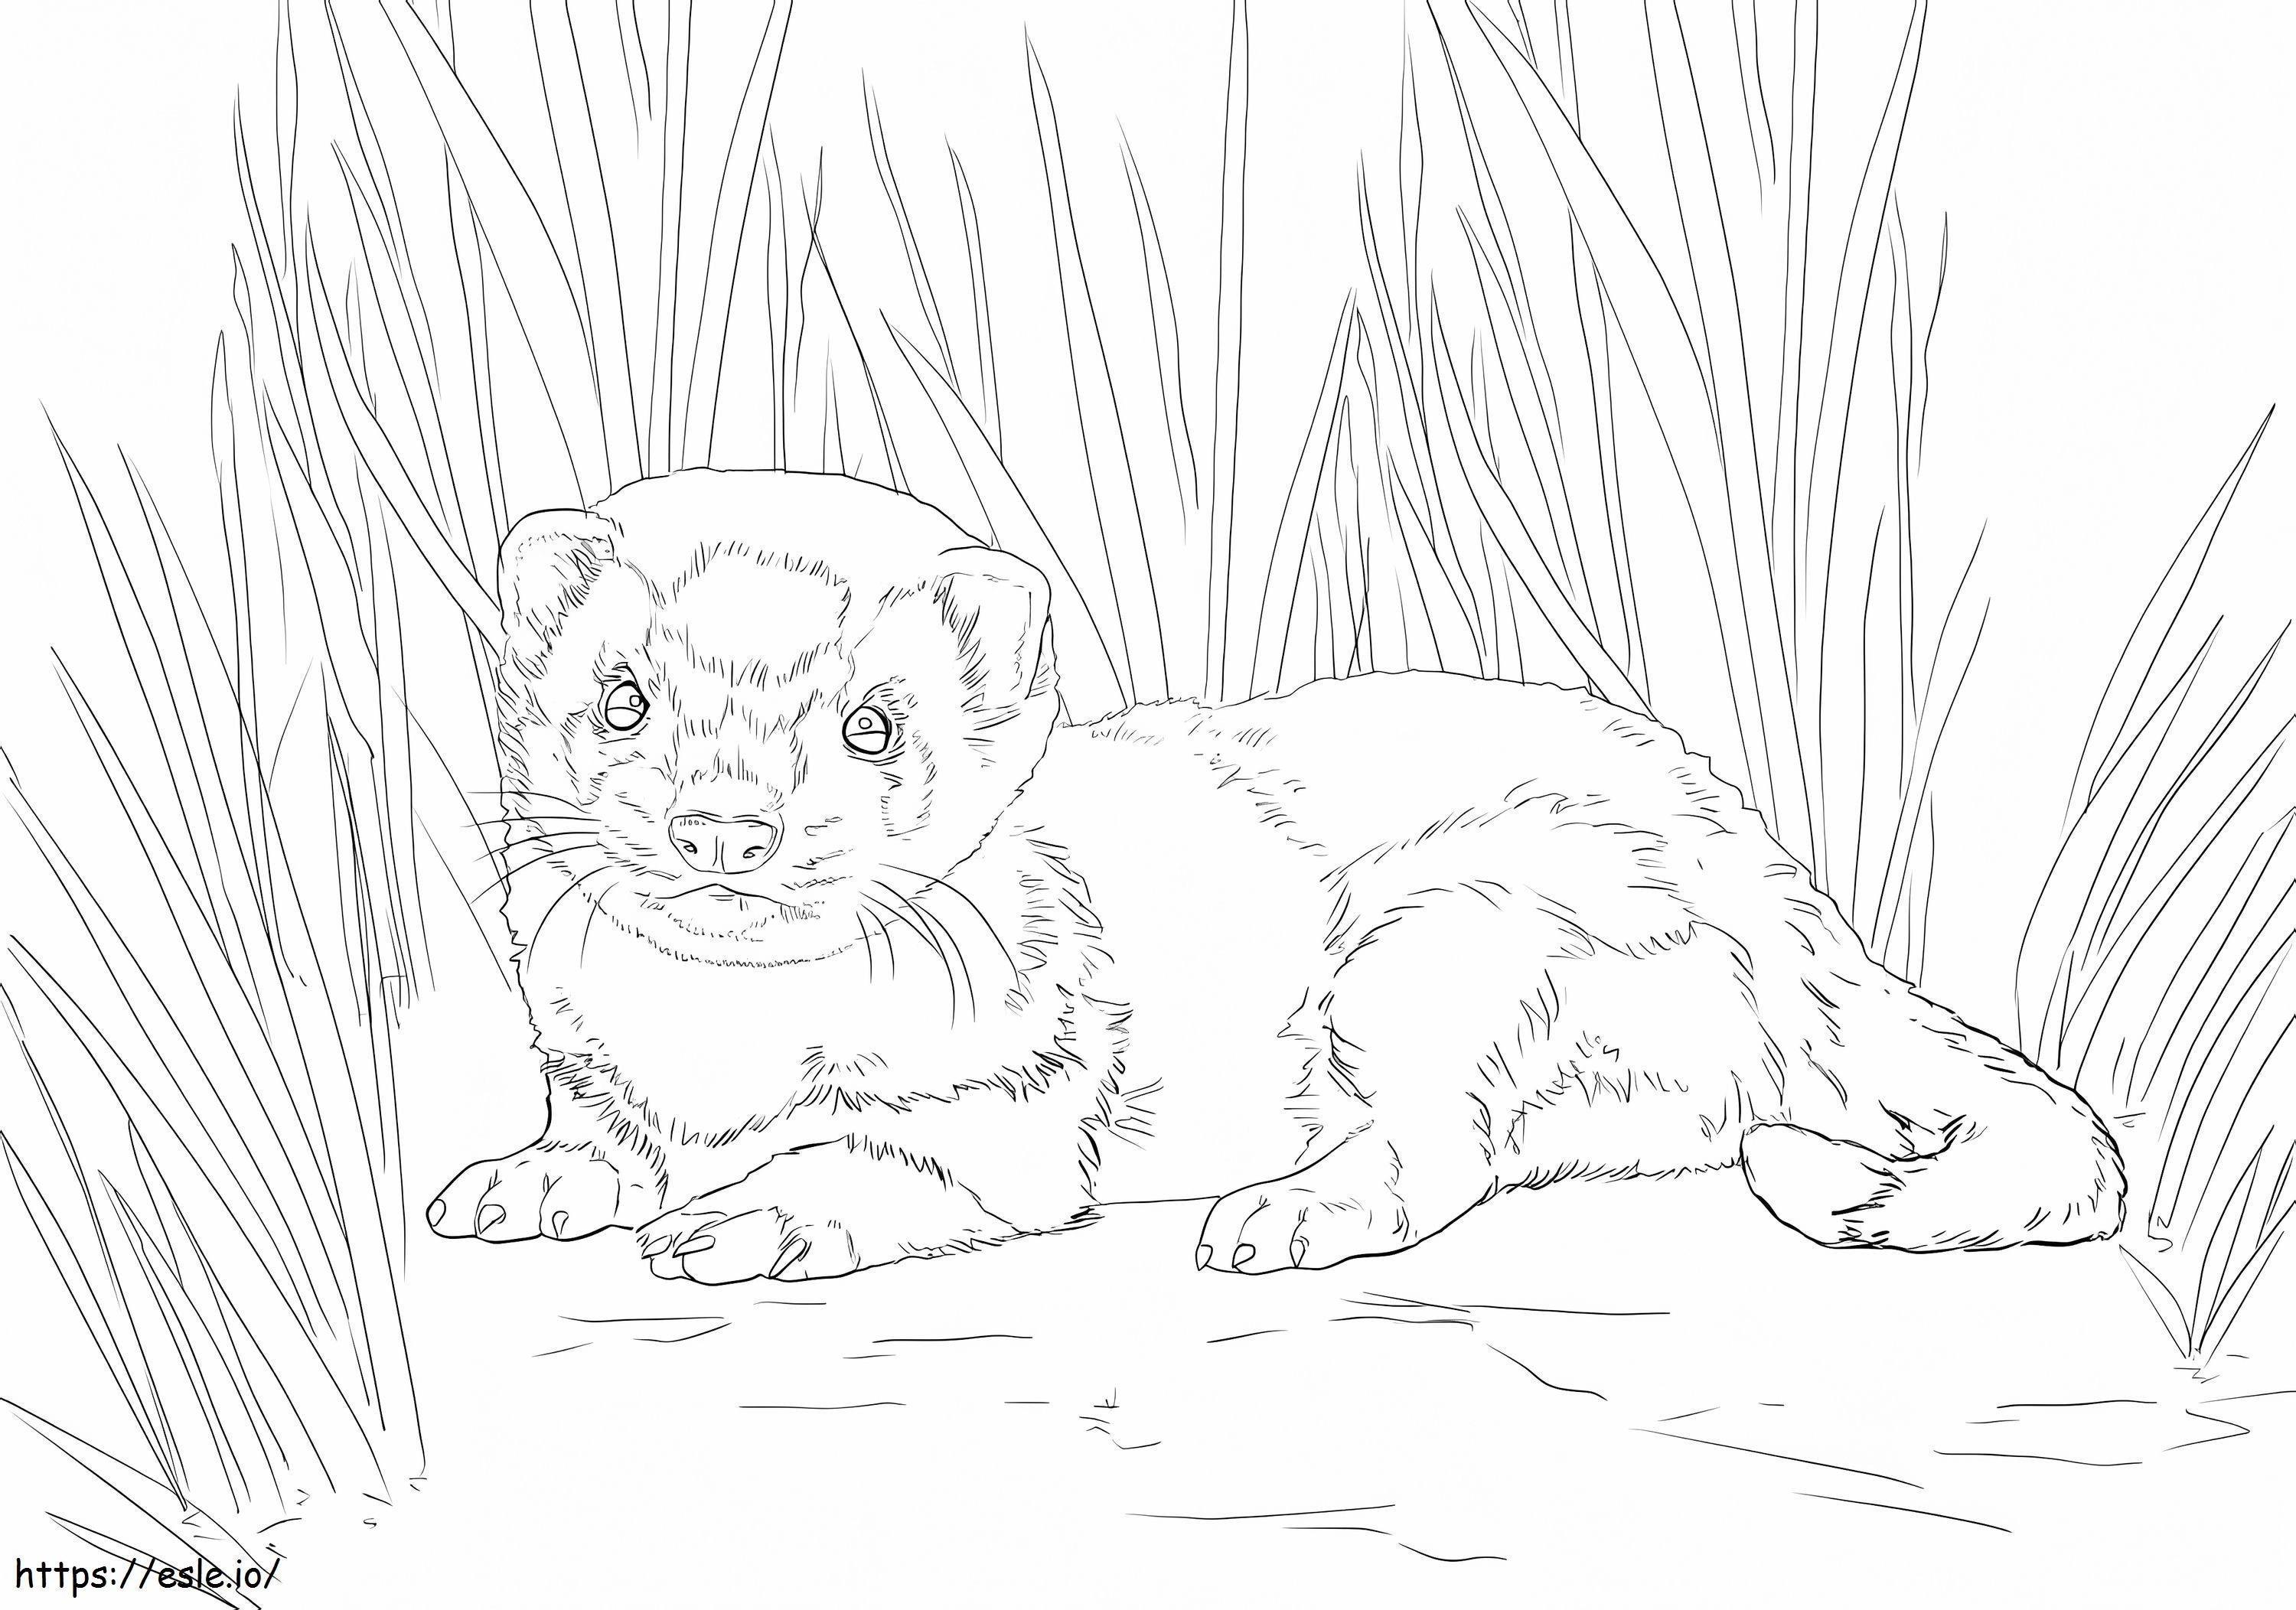 Baby Ferret coloring page